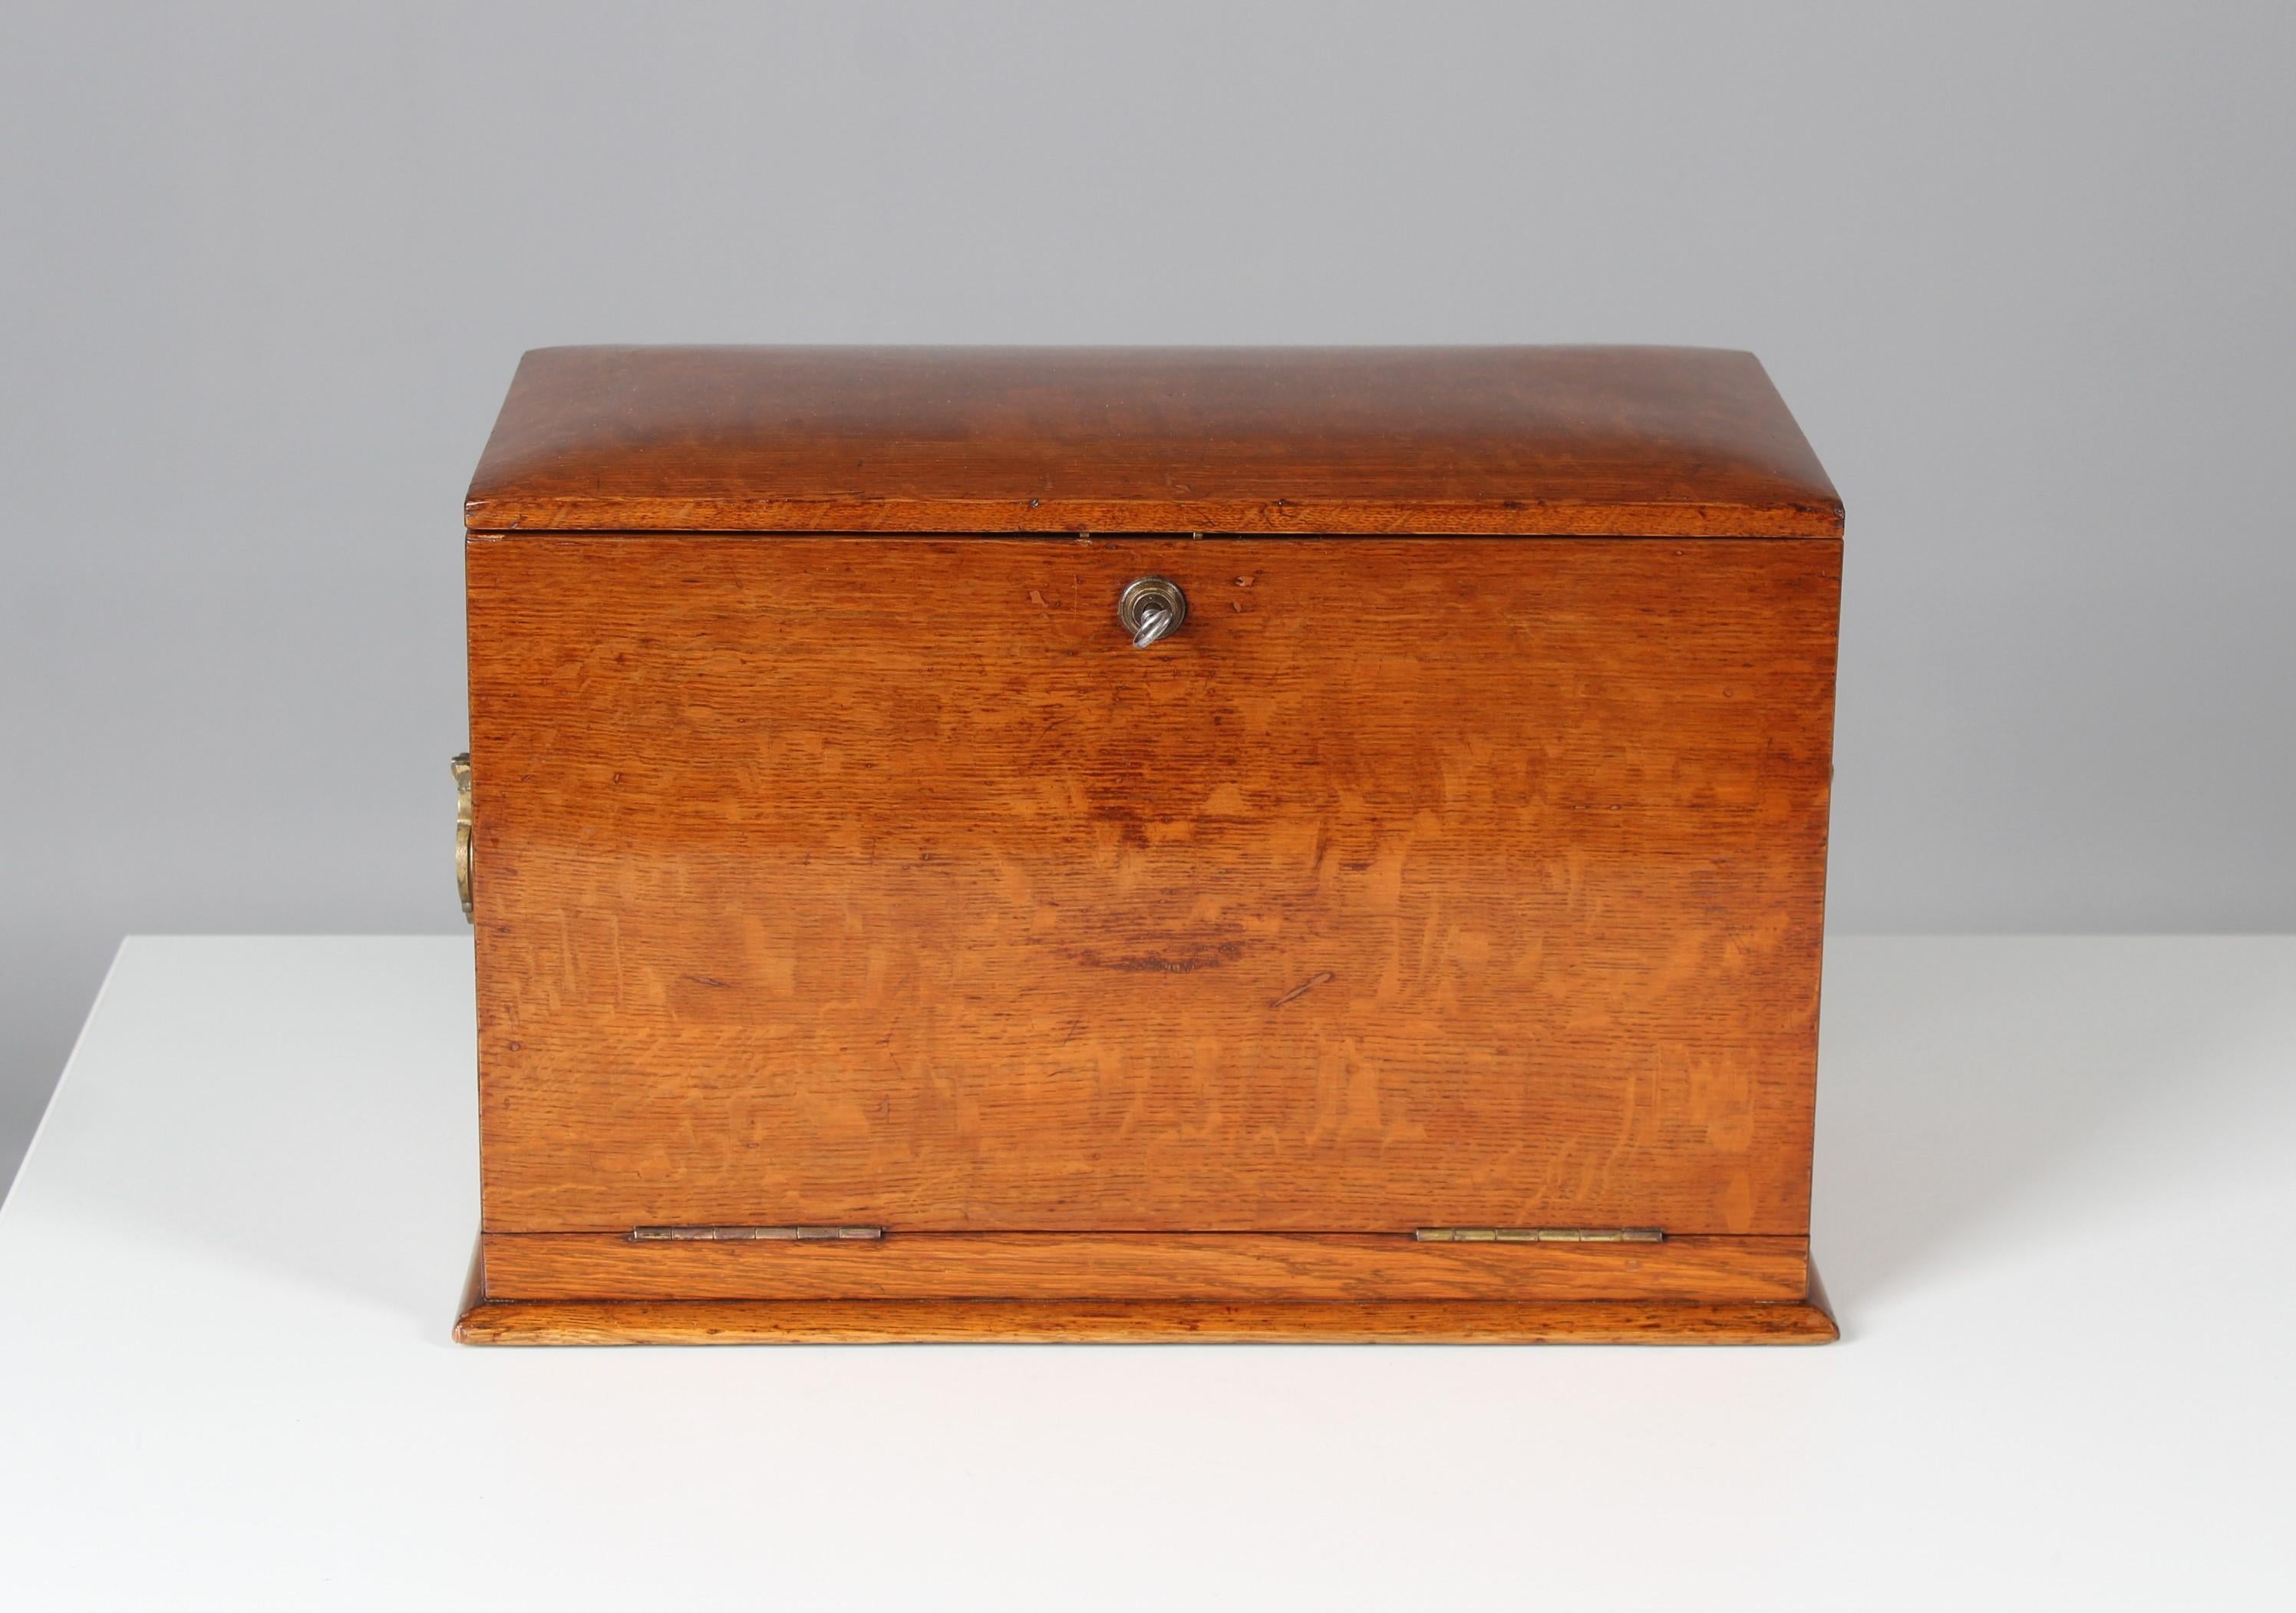 Antique traveling secretary, writing desk

England (London)
Oak
1920s

Dimensions: H x W x D: 28 x 43 x 22 cm

Description:
Unusual wooden box, so-called traveling secretary.

When closed, we see a plain box made of solid oak wood with